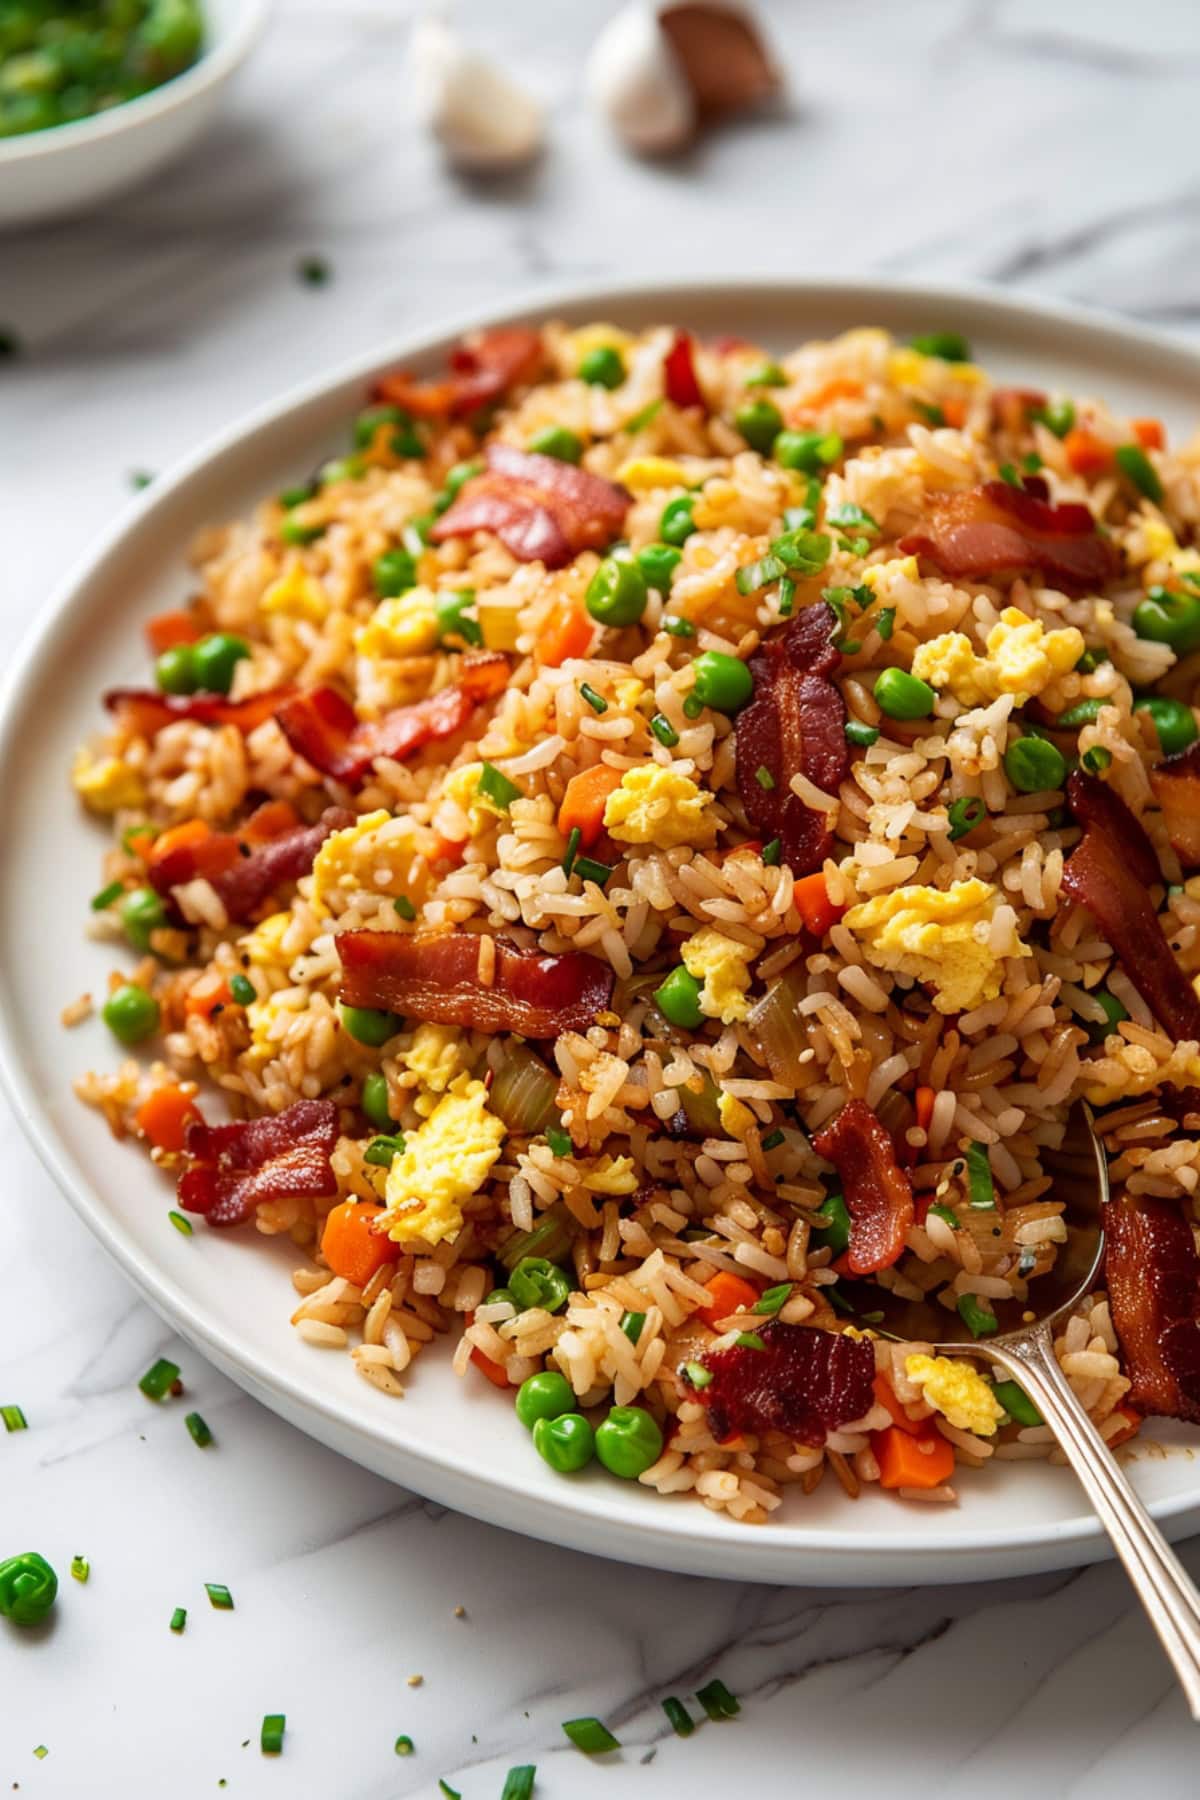 Fried rice with bacon served in a white plate with spoon.